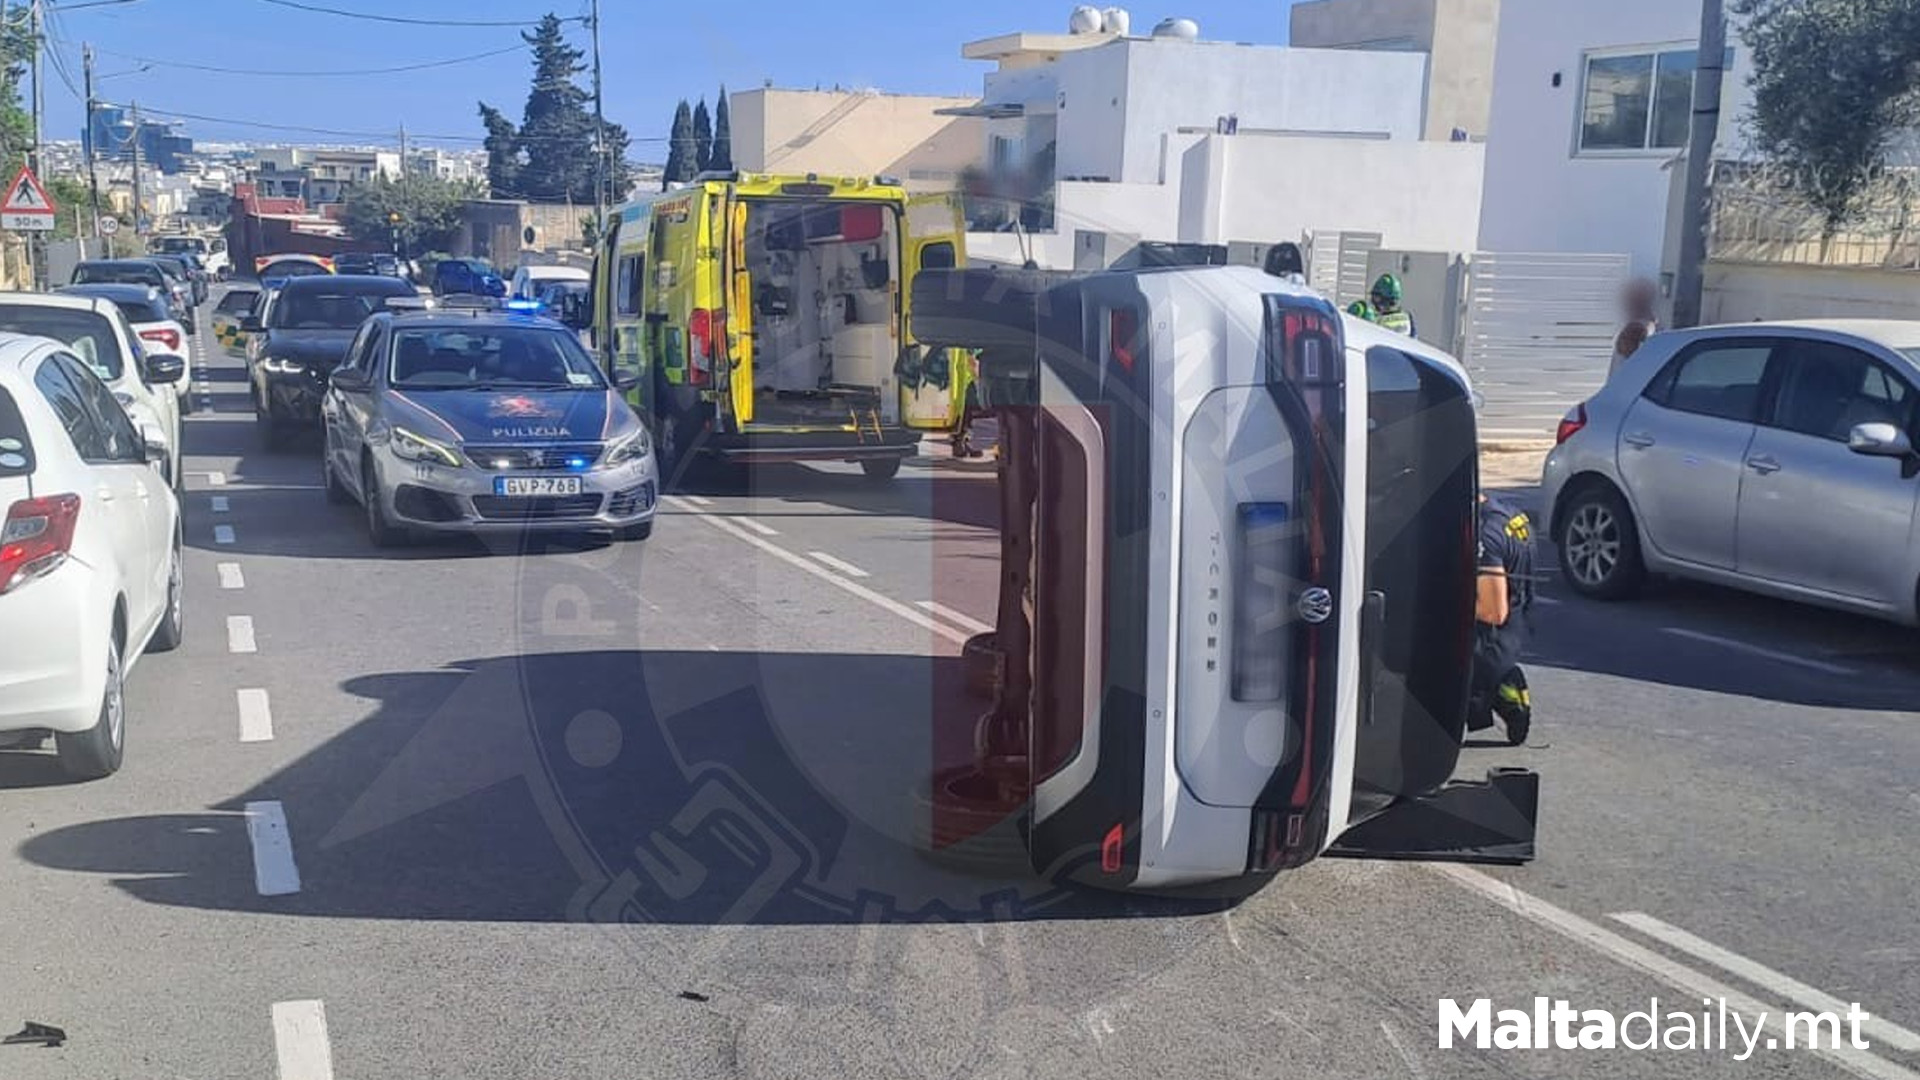 65 Year Old Driver Grievously Injured After Car Flips Over